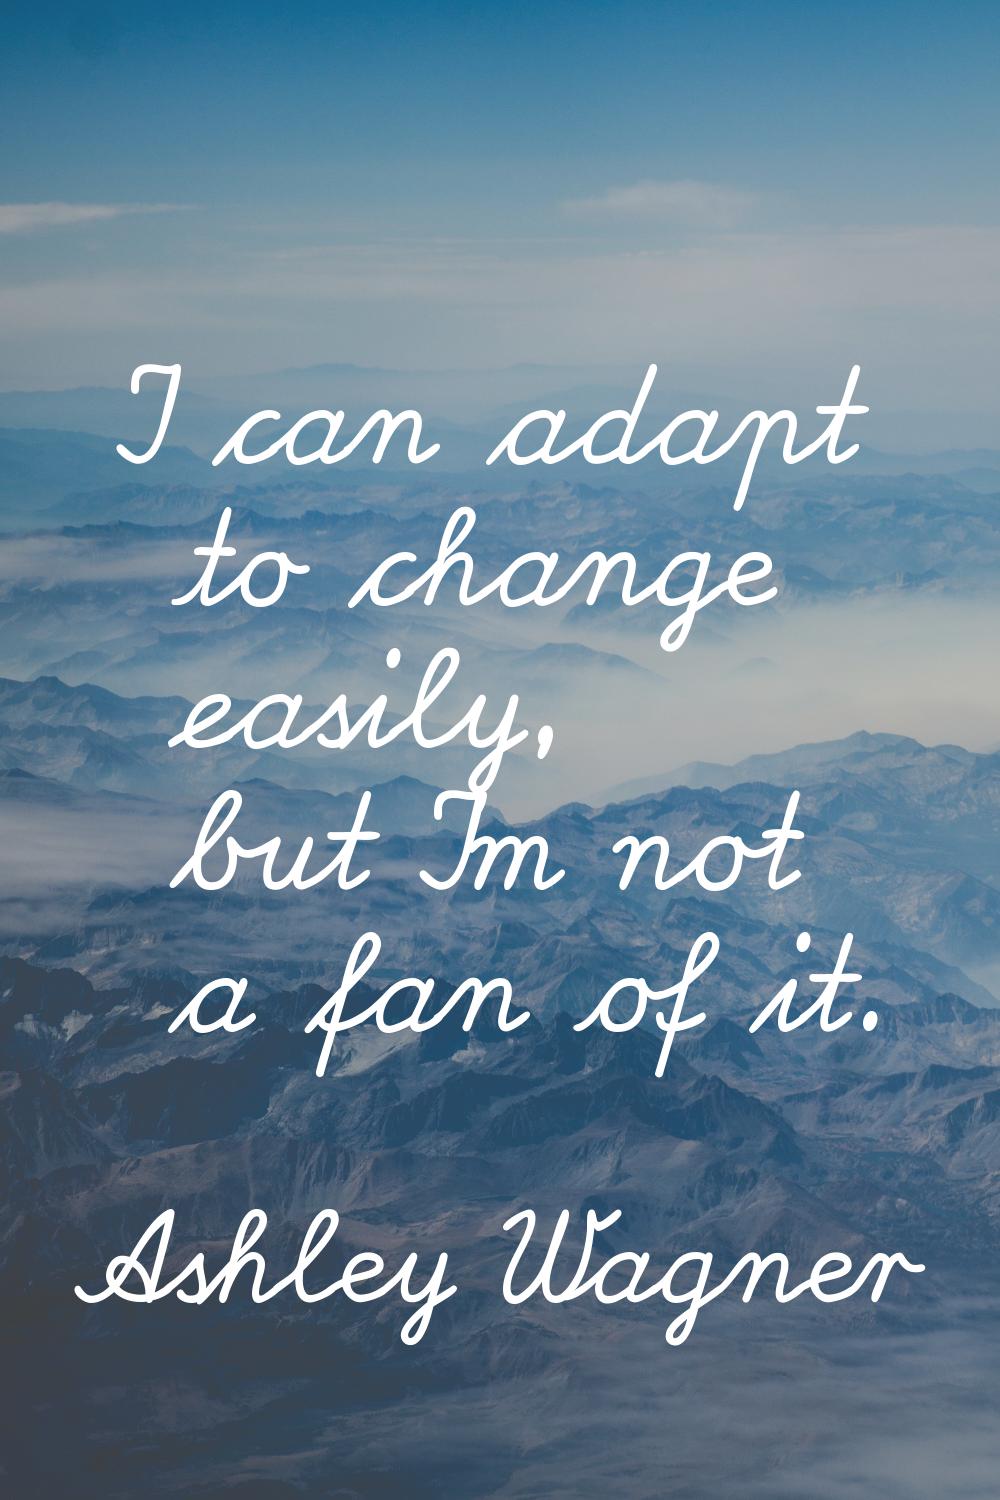 I can adapt to change easily, but I'm not a fan of it.